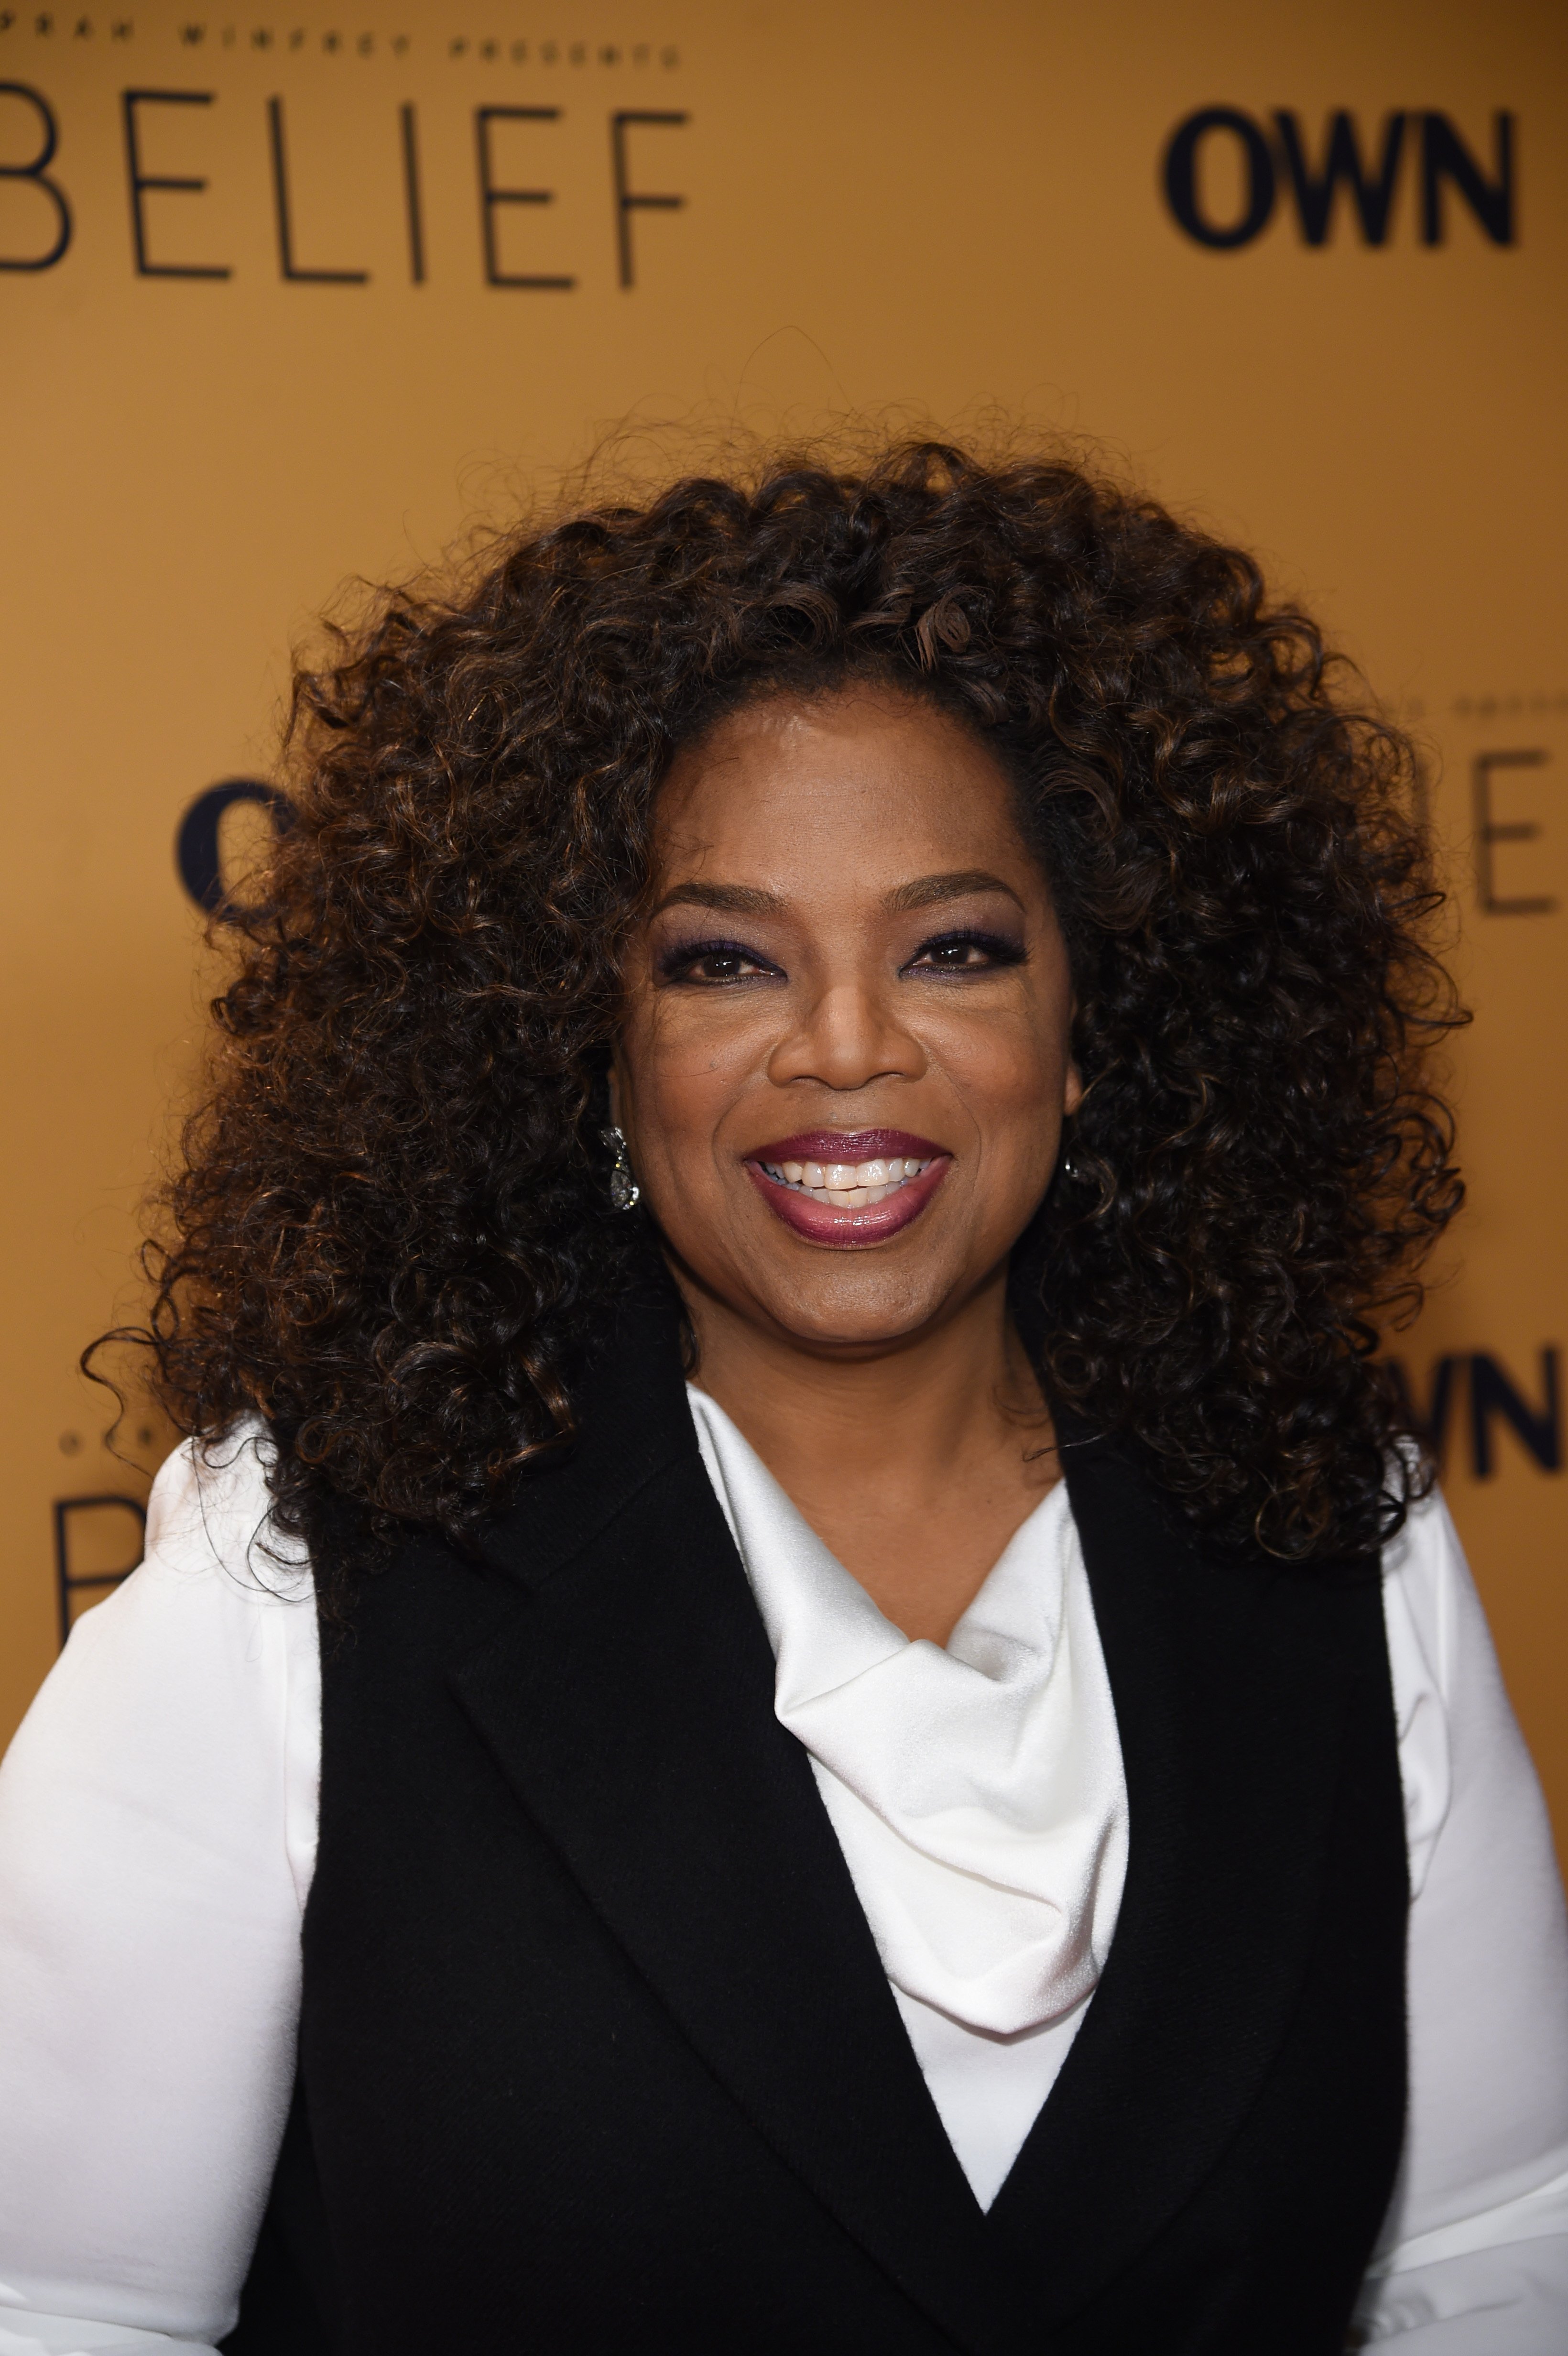 Oprah Winfrey at the New York premiere of "Belief" in October 2015. | Photo: Getty Images